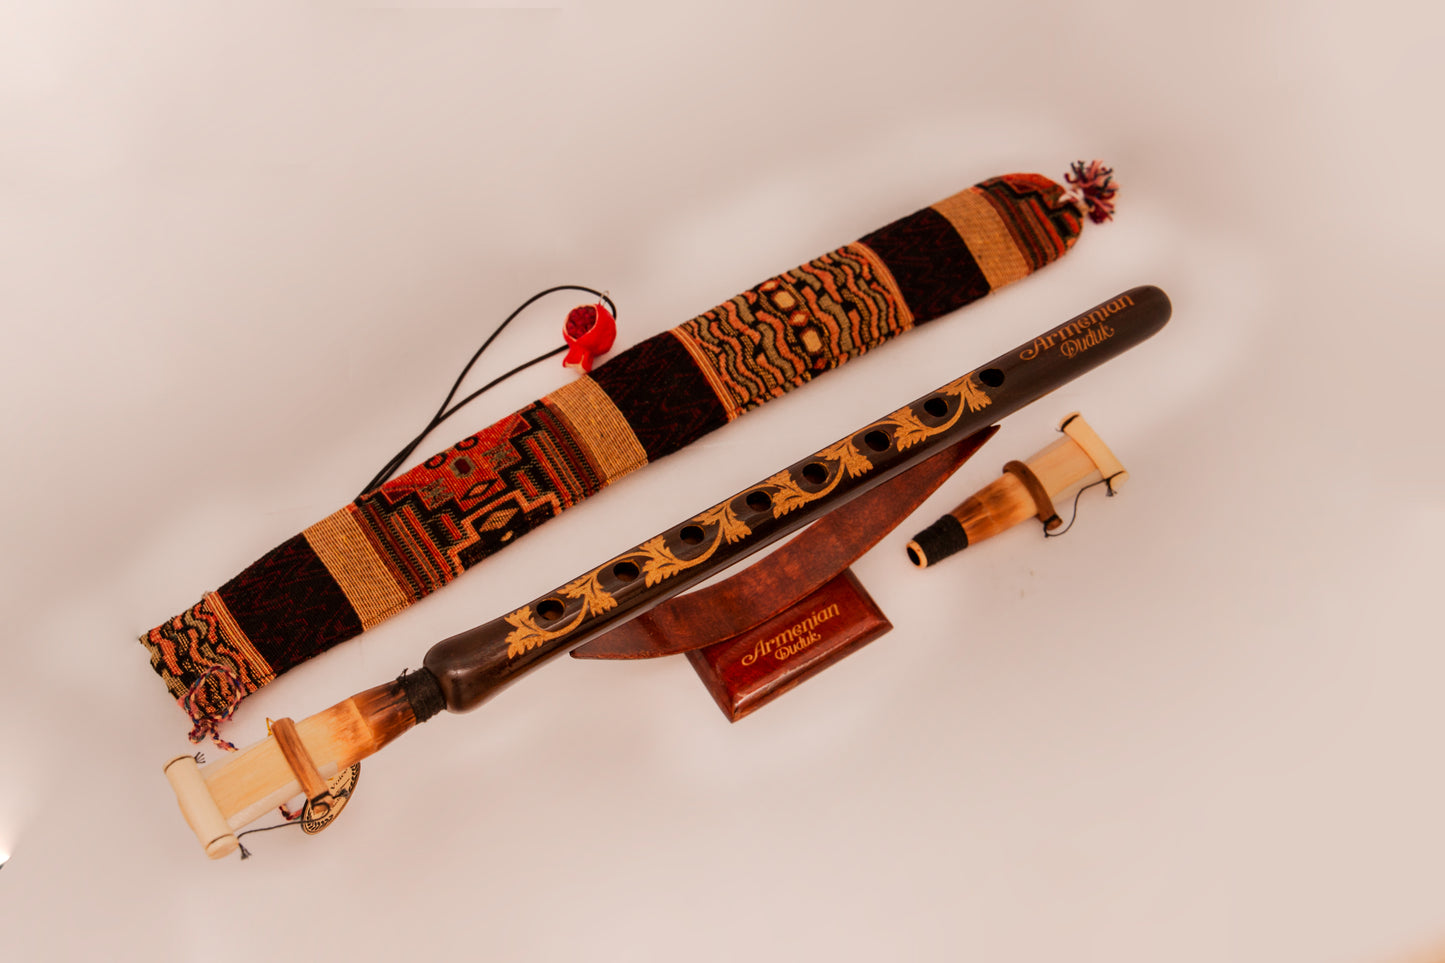 Armenian duduk in Key A from apricot wood - 2 reeds - Hand-carved wooden stand-holder & national Case | Best Gift for Musicians